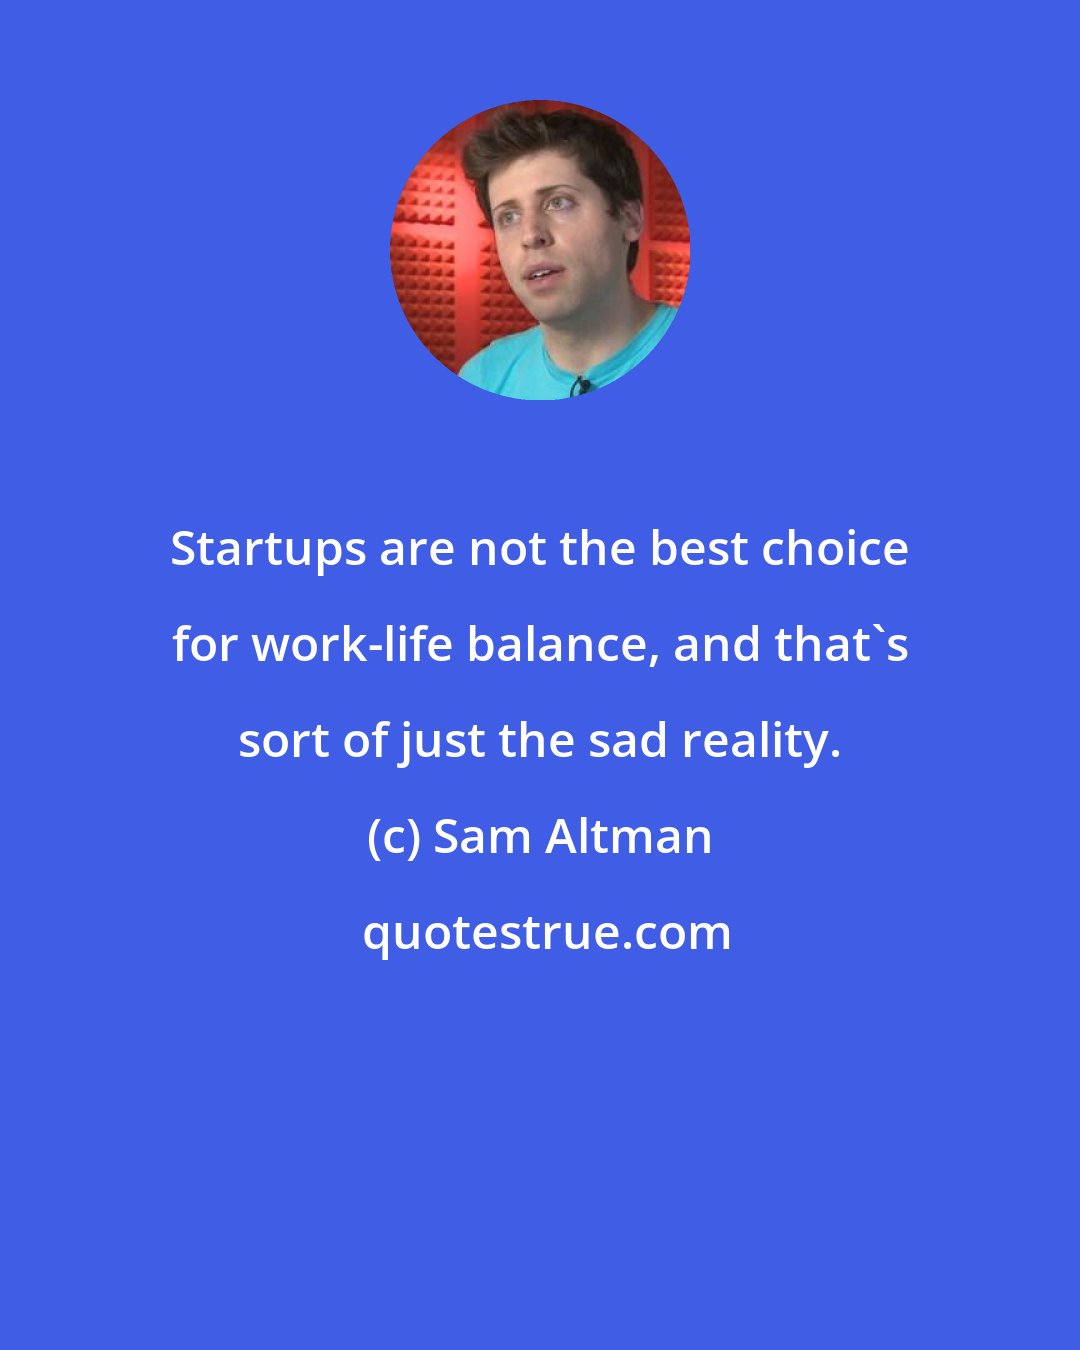 Sam Altman: Startups are not the best choice for work-life balance, and that's sort of just the sad reality.